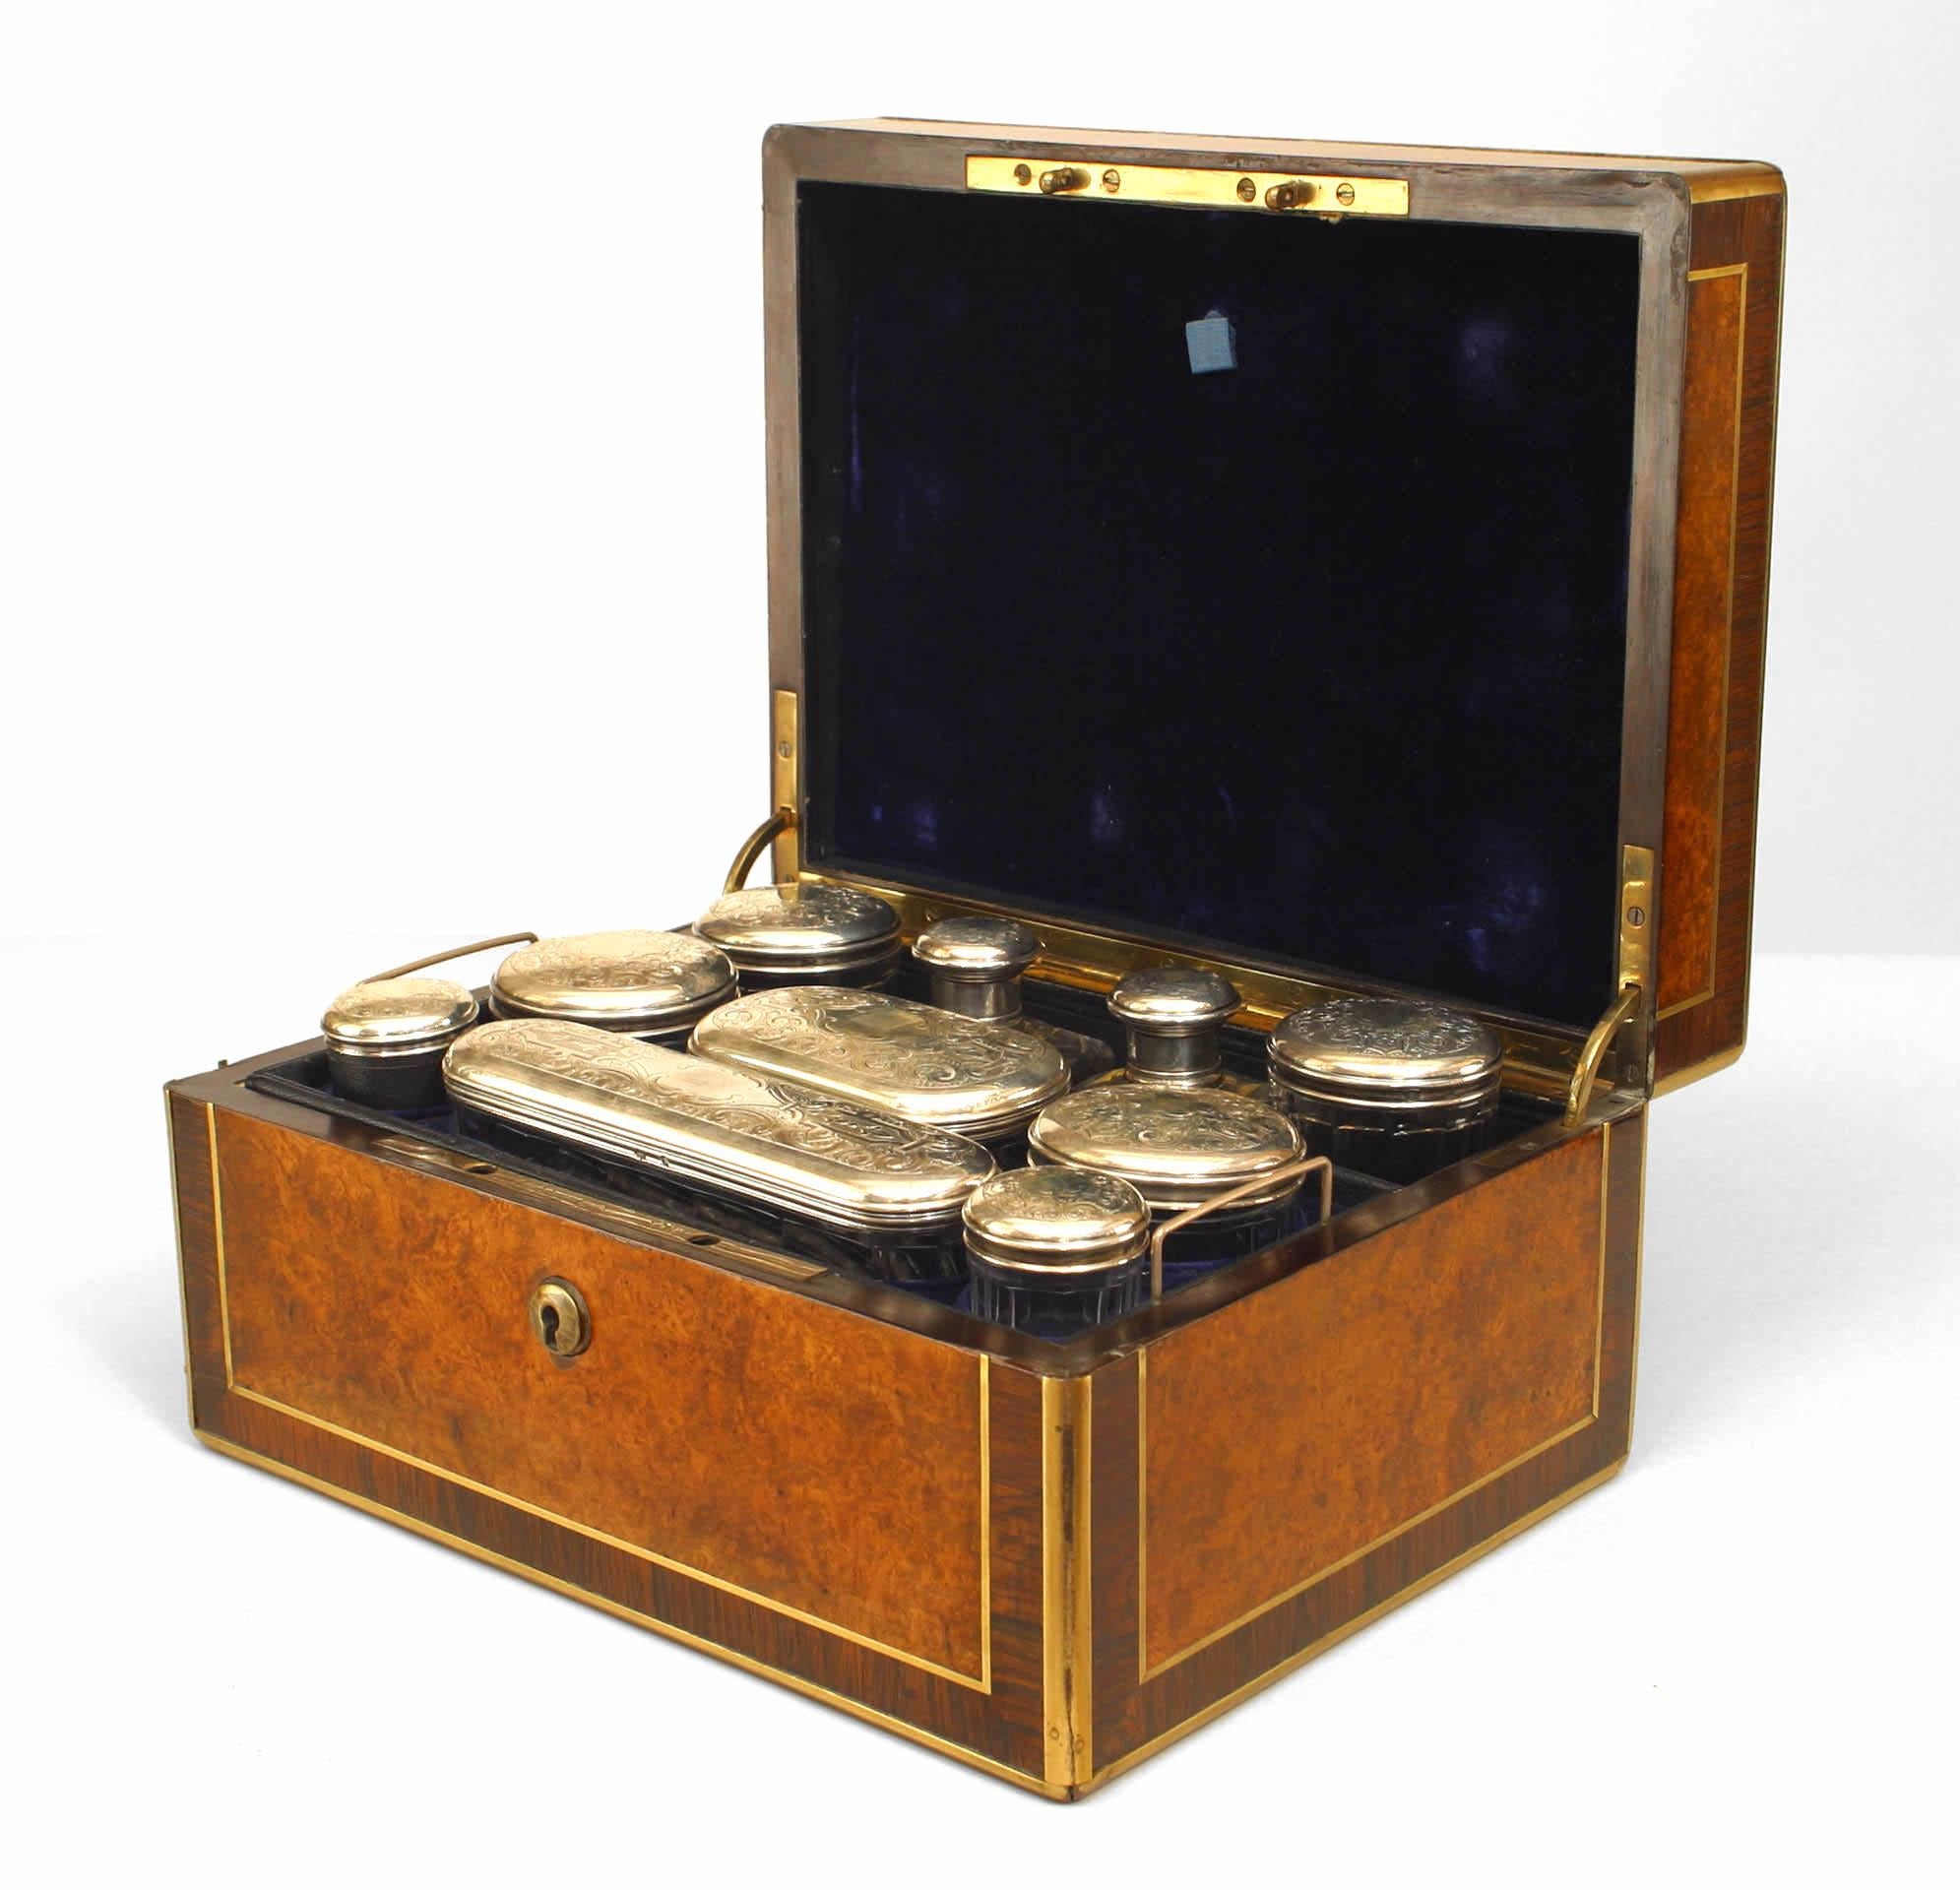 English Victorian (19th Cent) burled walnut & rosewood traveling vanity / make up case with brass inlay and fitted with ten misc. glass canisters, original mirror and various accessories.
   